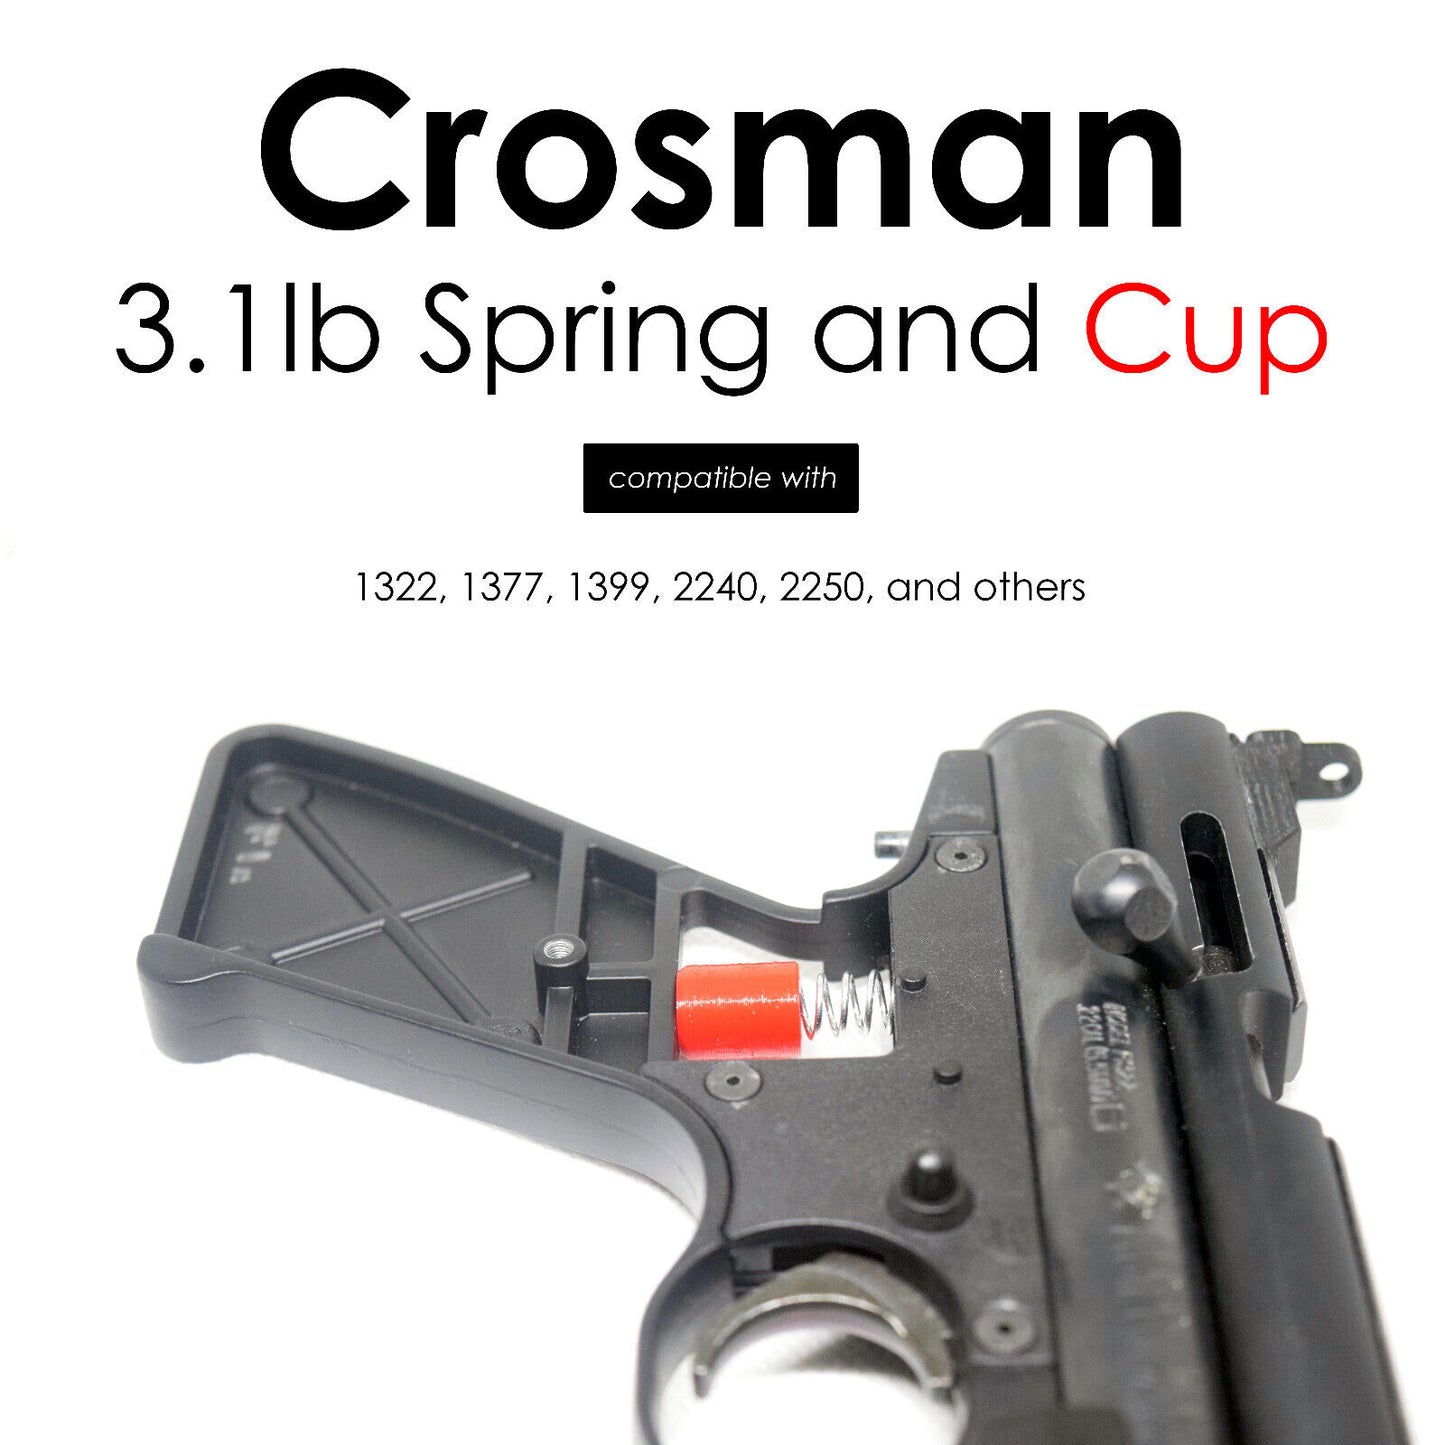 Crosman Light Pull 3.1 lb Trigger Sear Spring and Cup for 1322, 2240, 2250, 1377